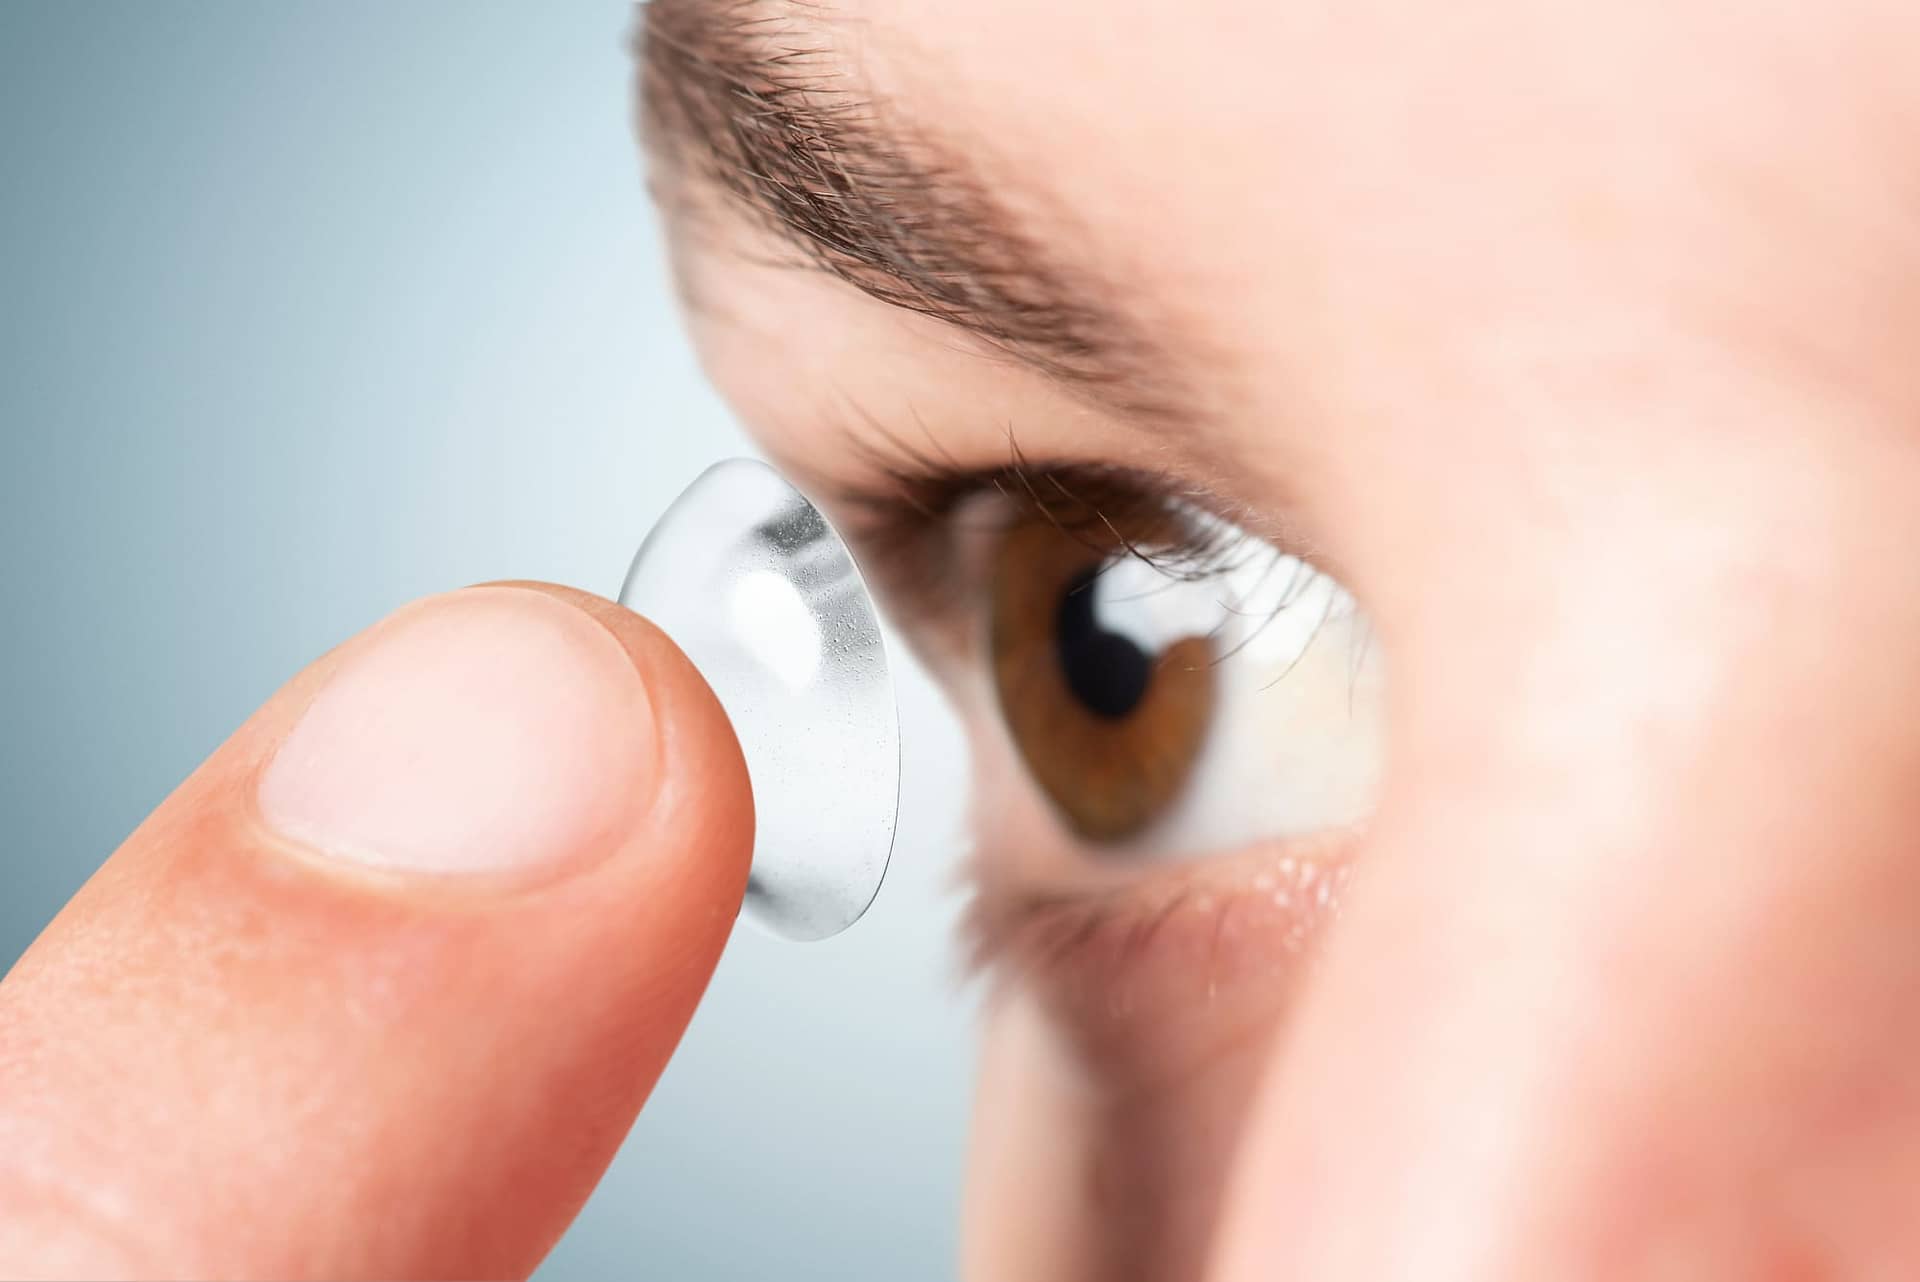 Contact lenes collections in Kerala